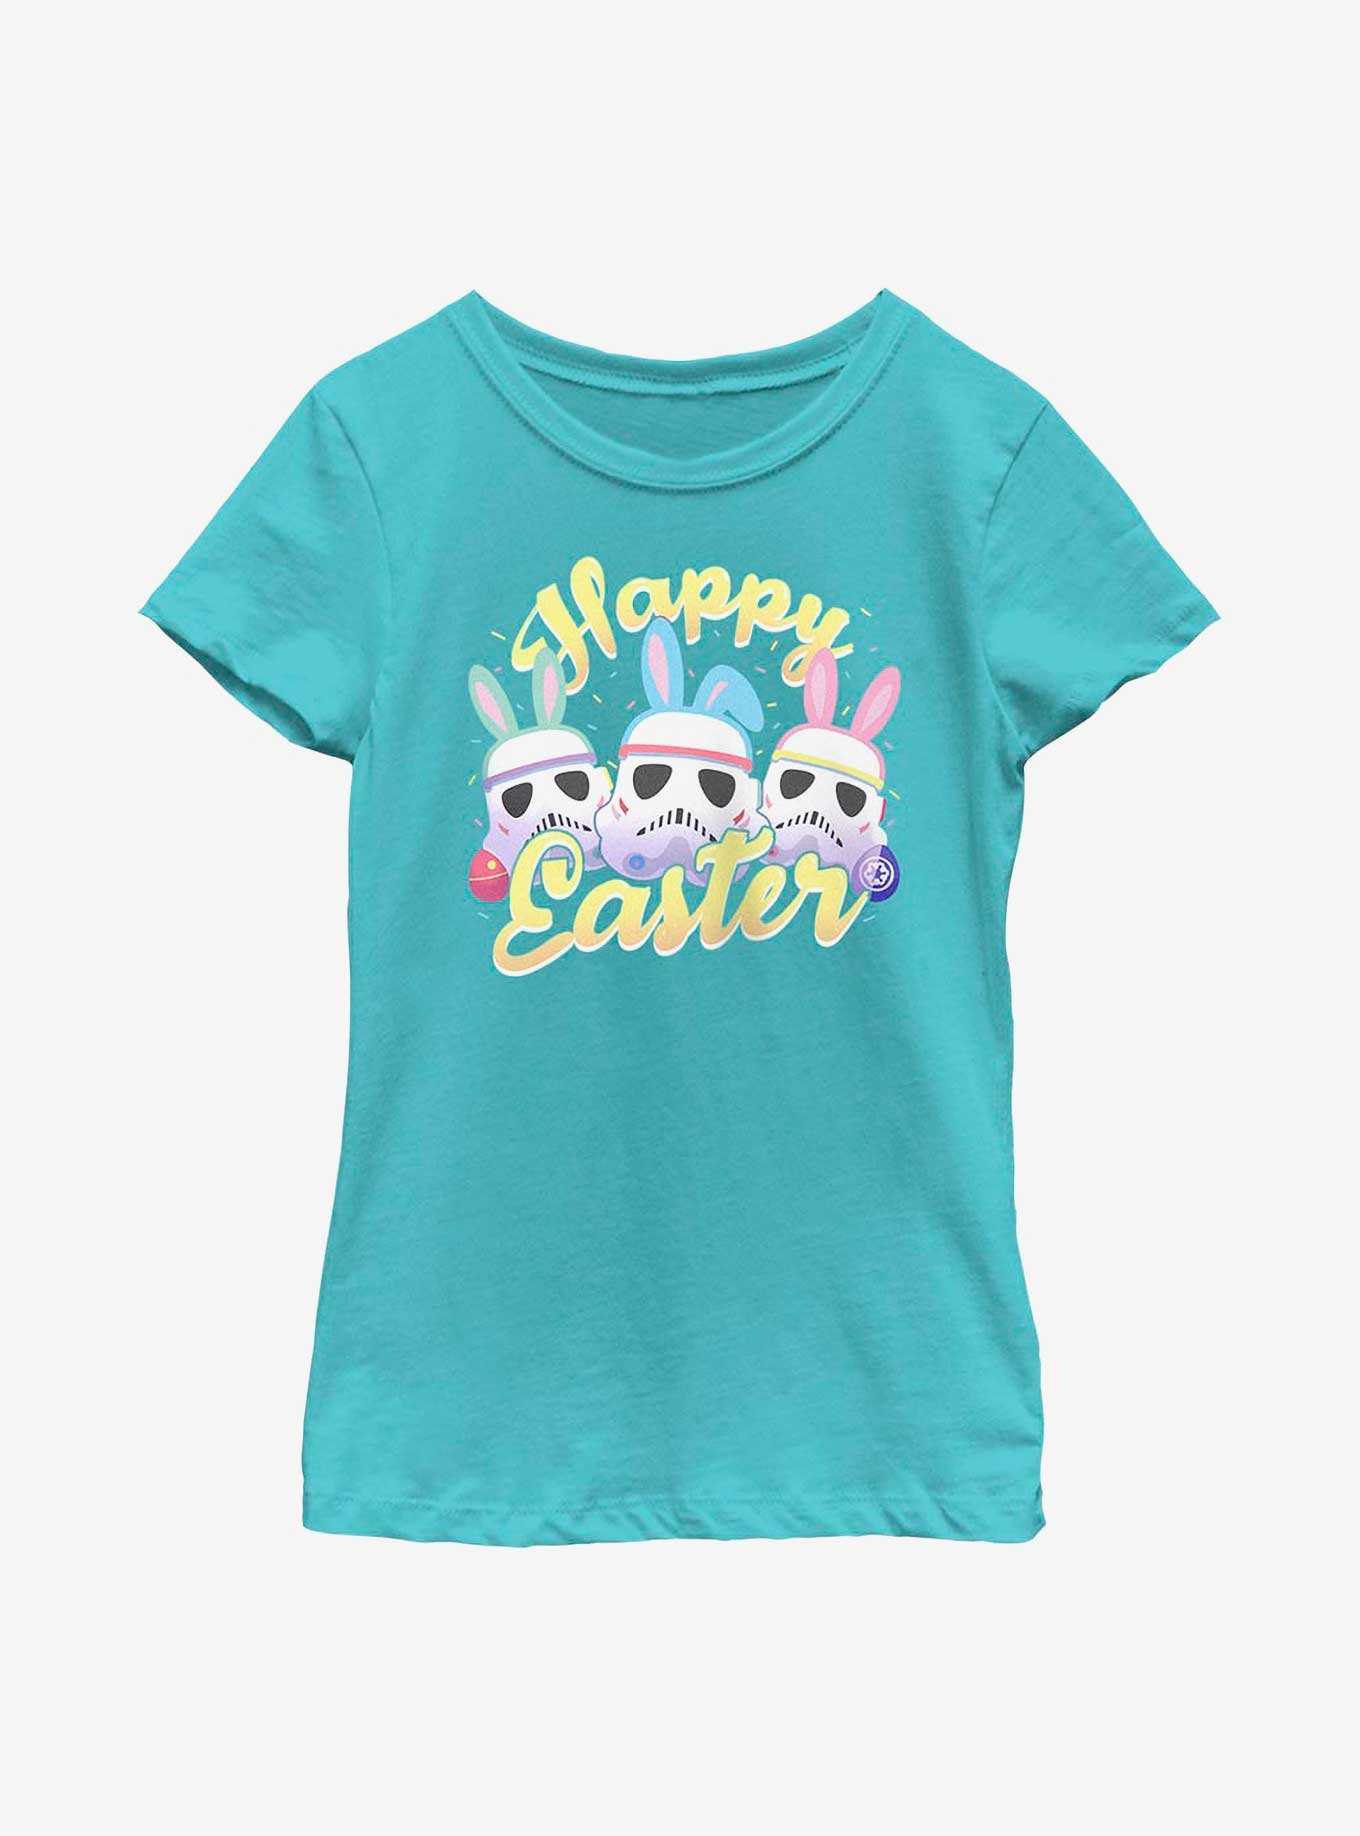 Star Wars Trooper Bunnies Happy Easter Youth Girls T-Shirt, , hi-res